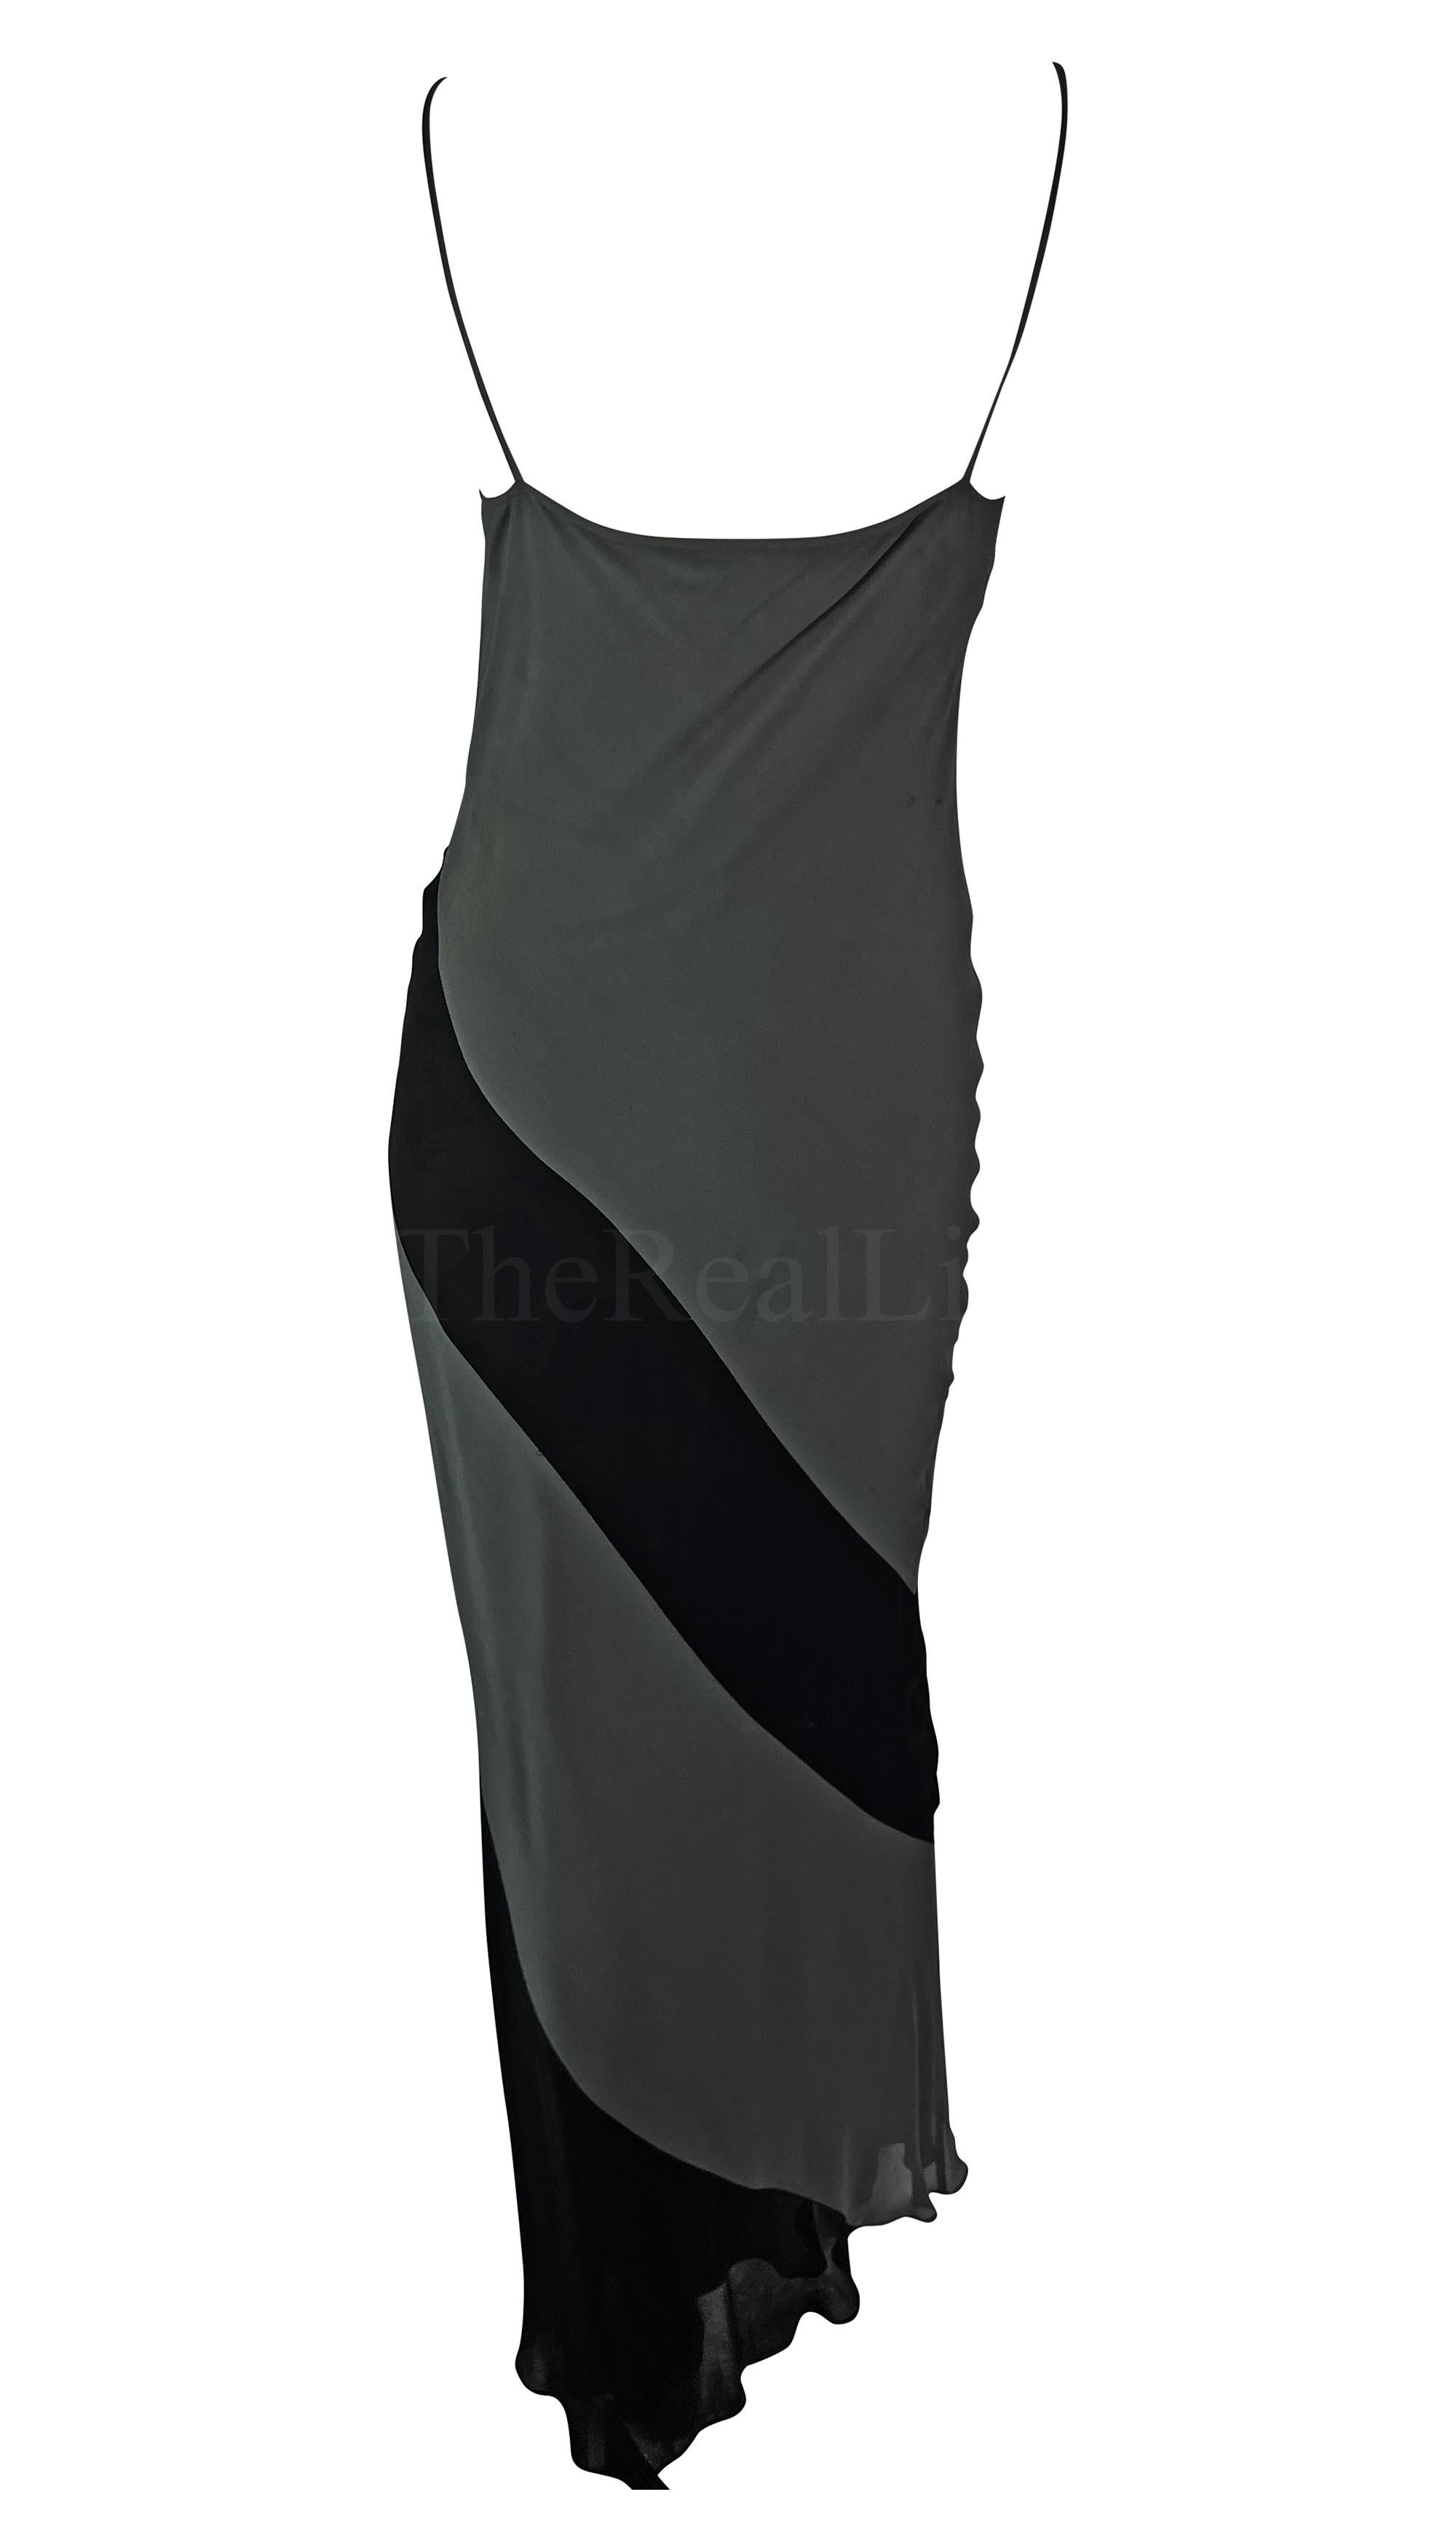 S/S 1997 Gucci by Tom Ford Grey Black Panel Slip Dress Gown For Sale 3